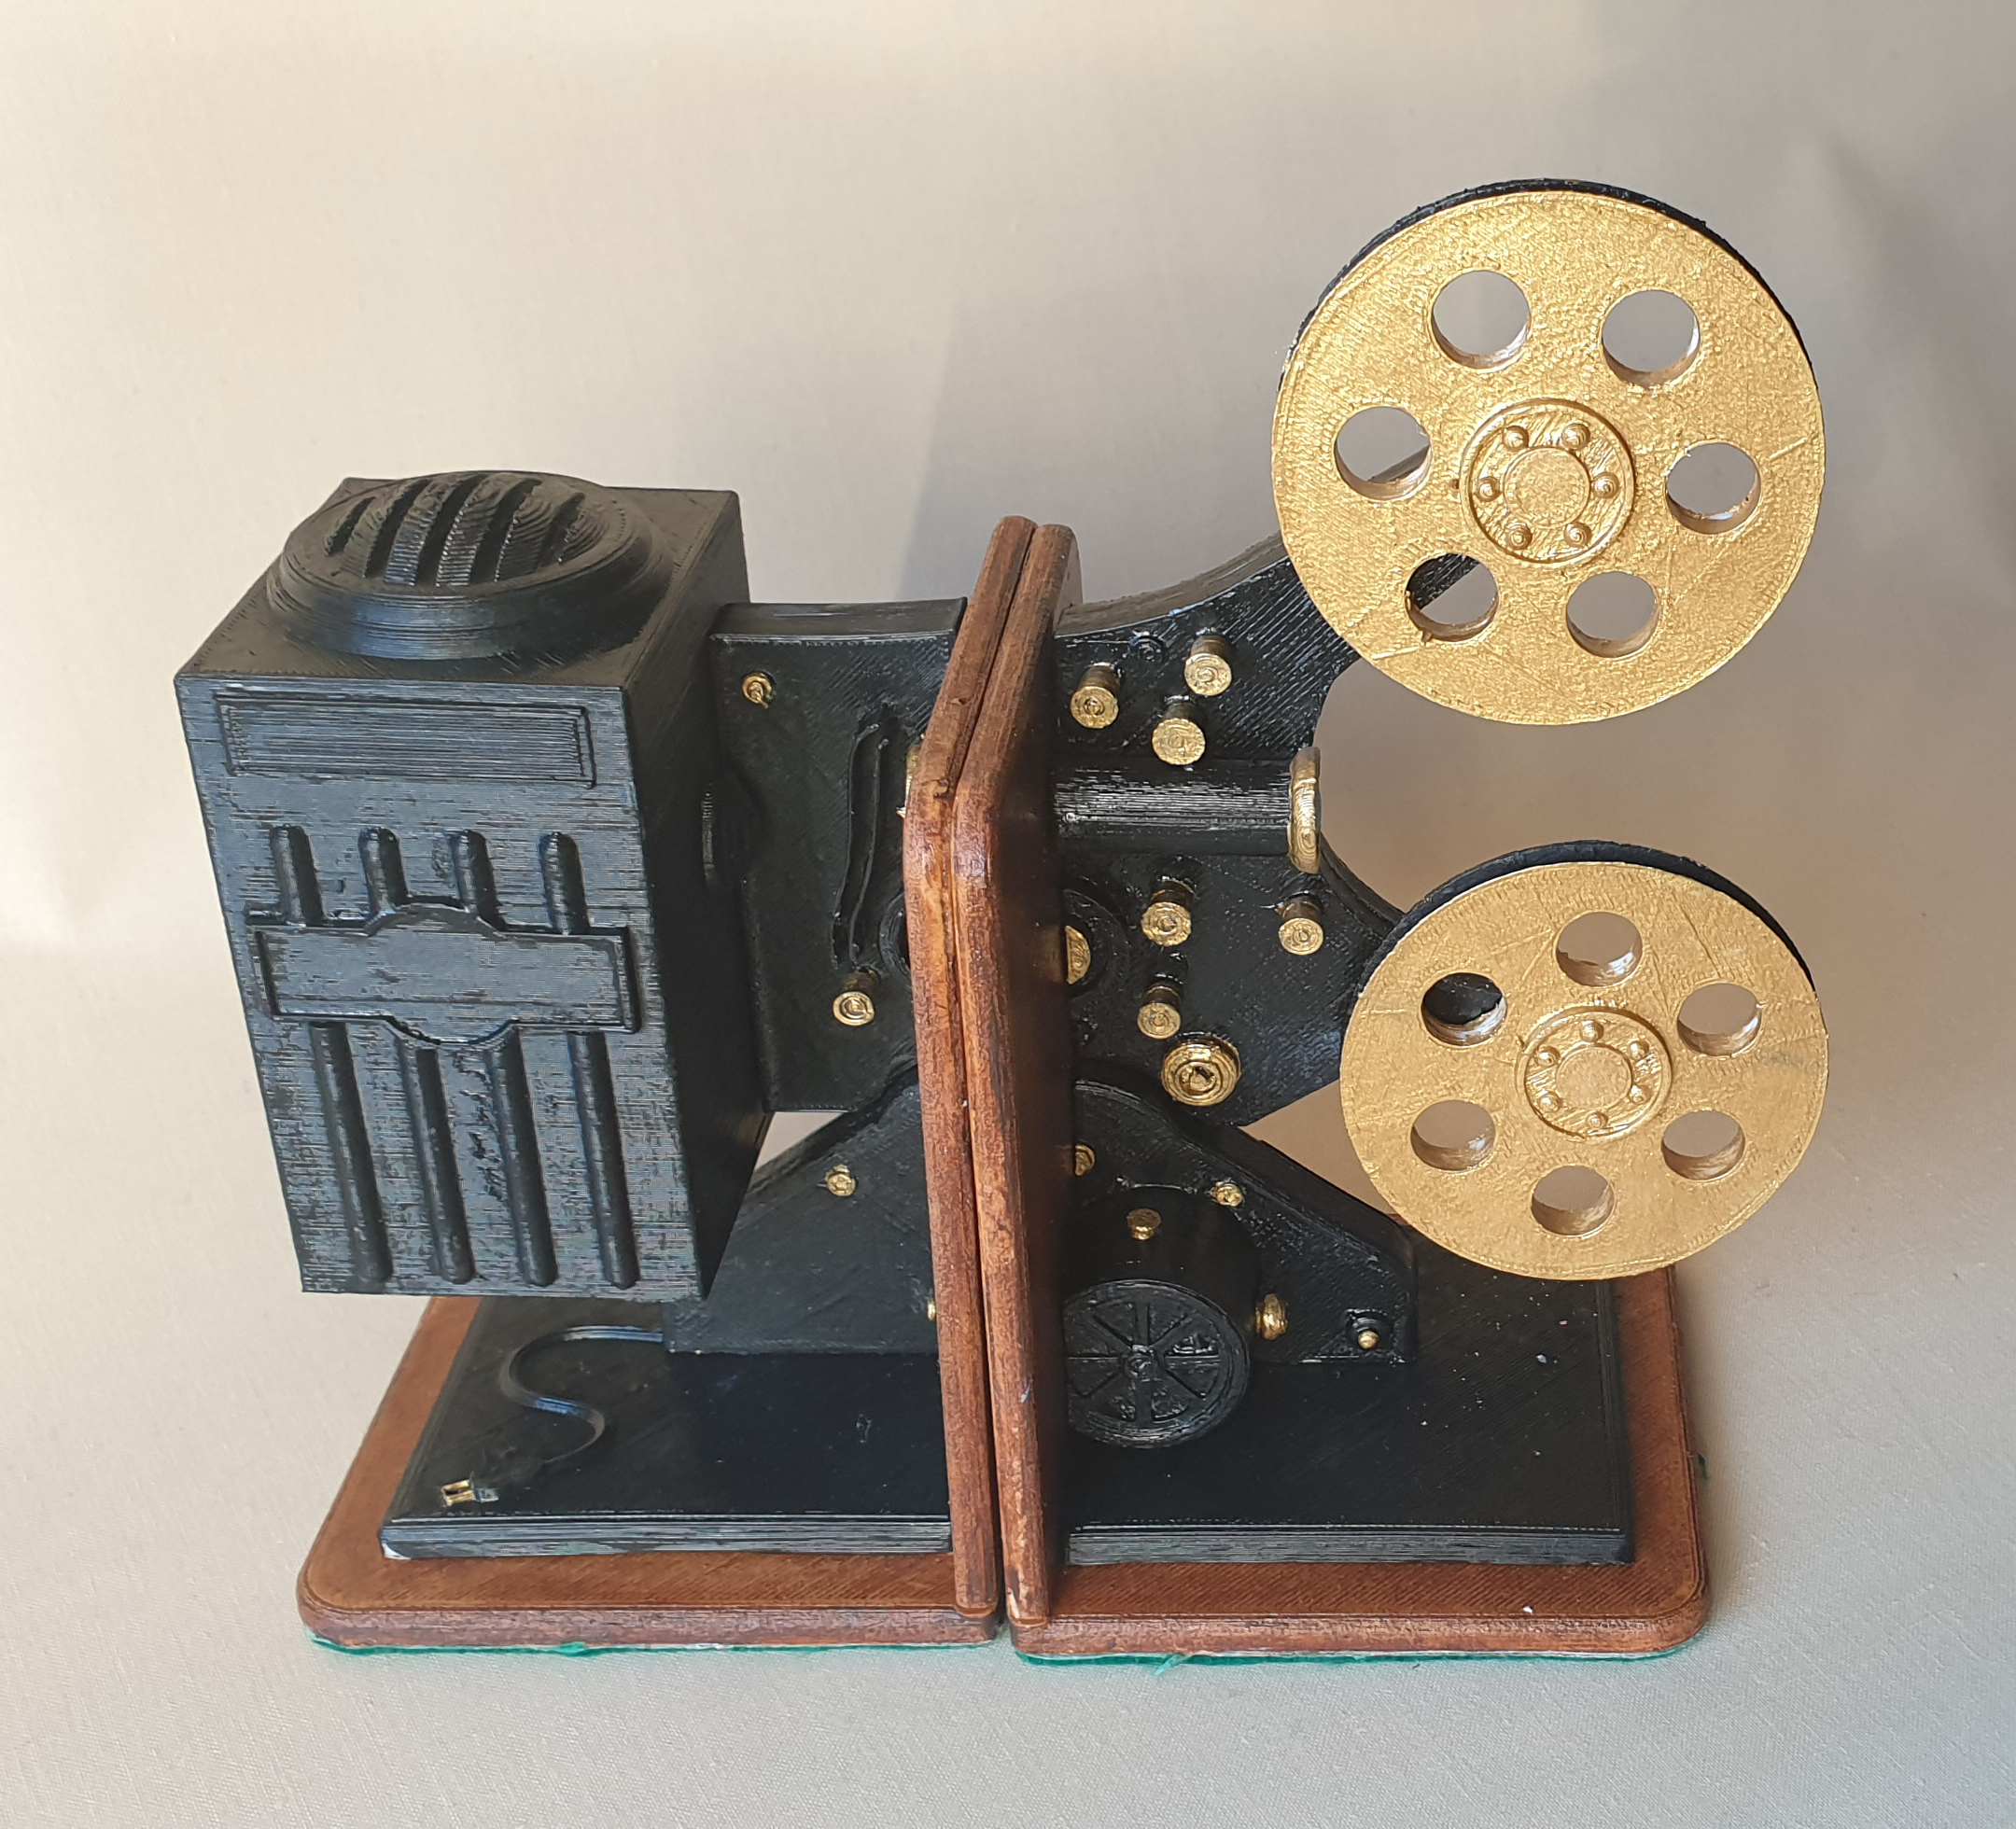 Vintage Projector Bookends